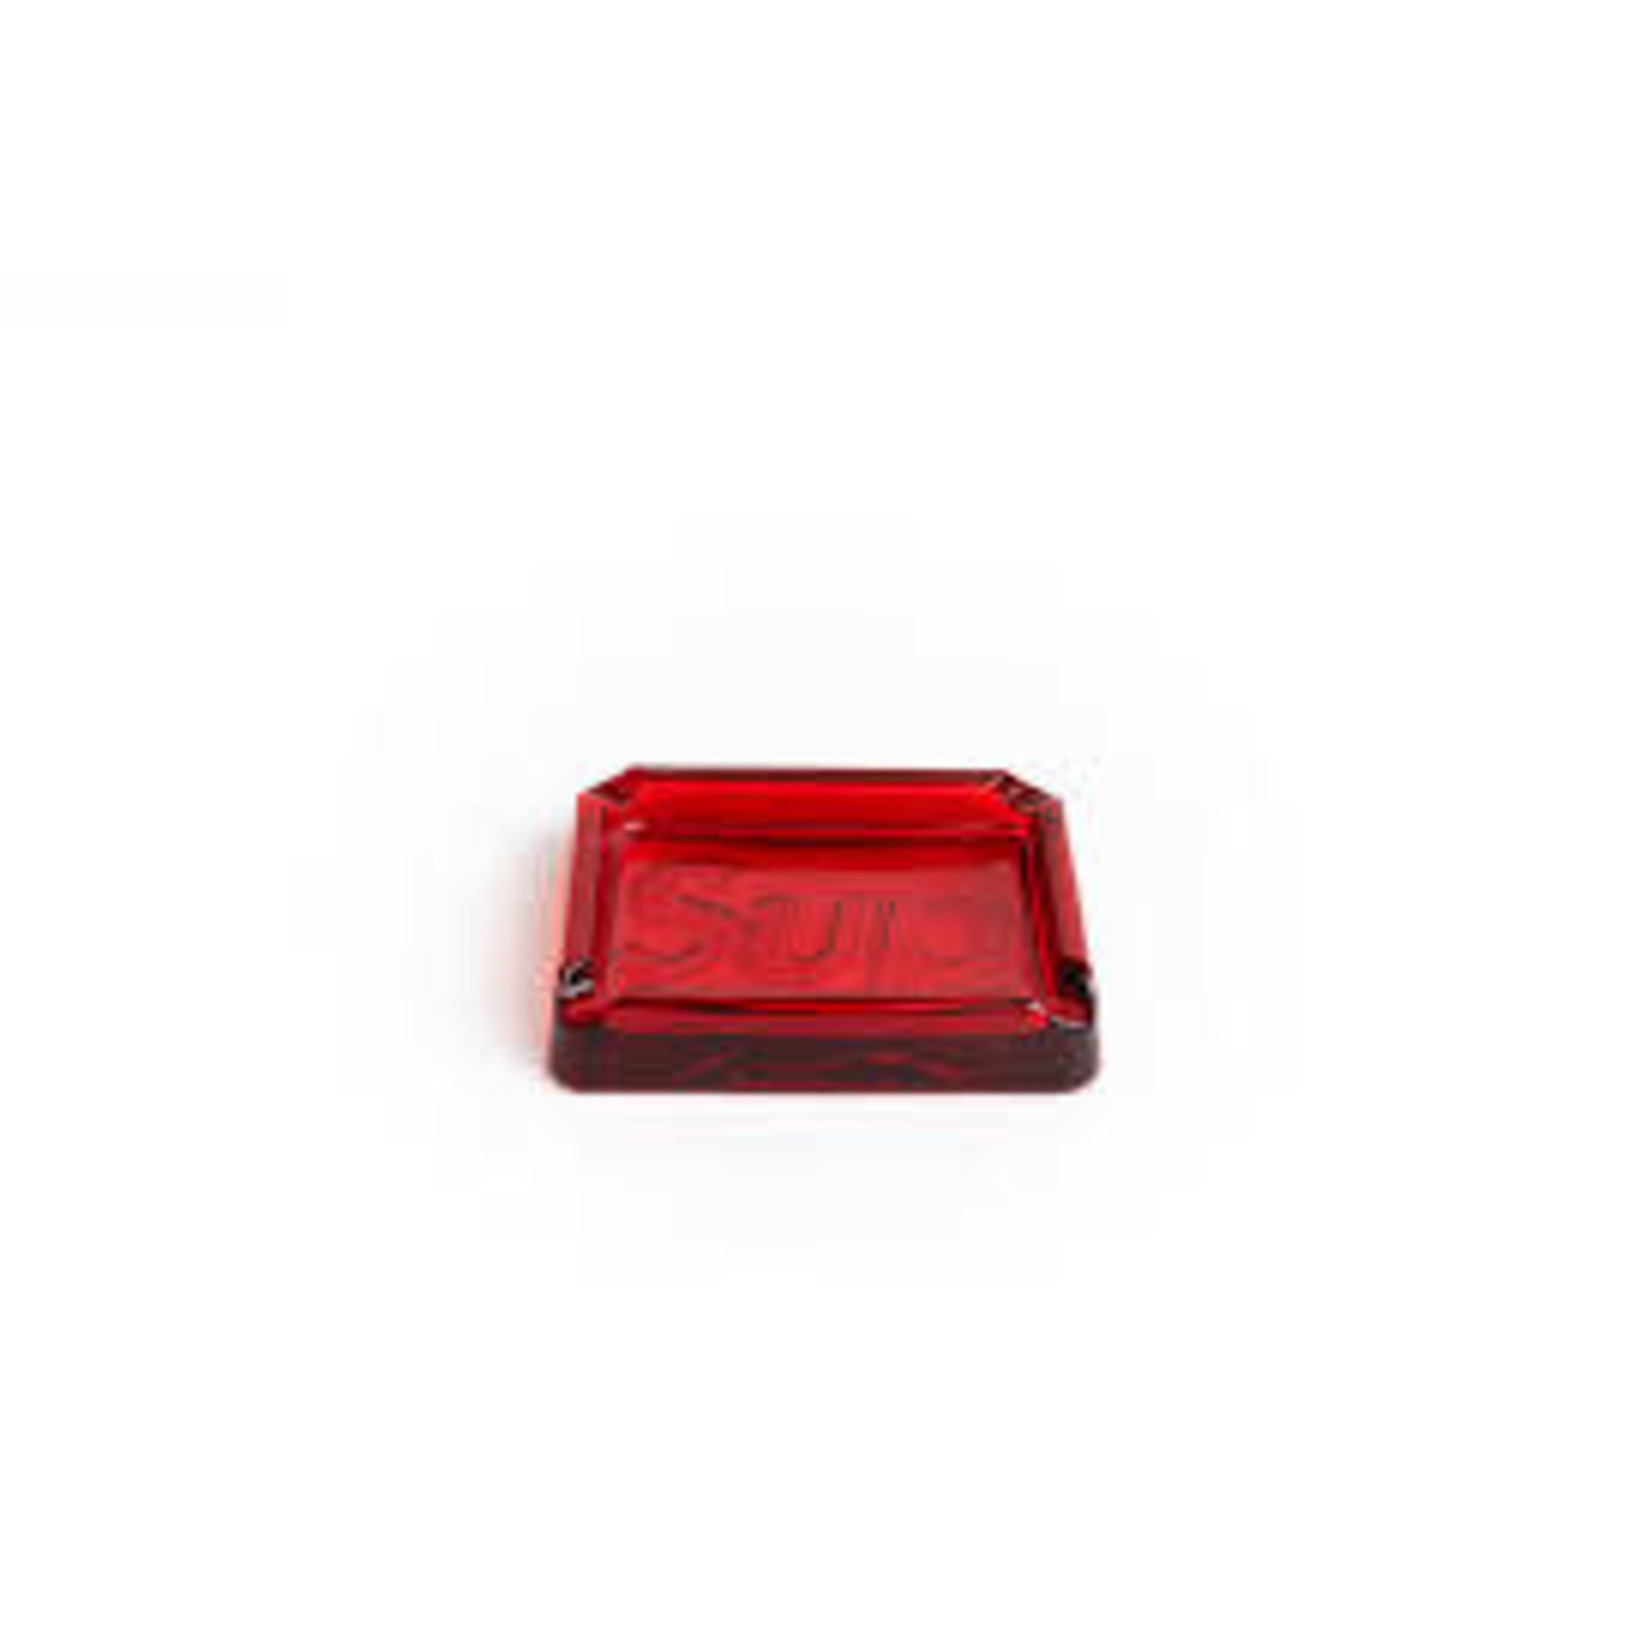 Supreme Supreme Debossed Glass Ashtray red Size OS, DS BRAND NEW